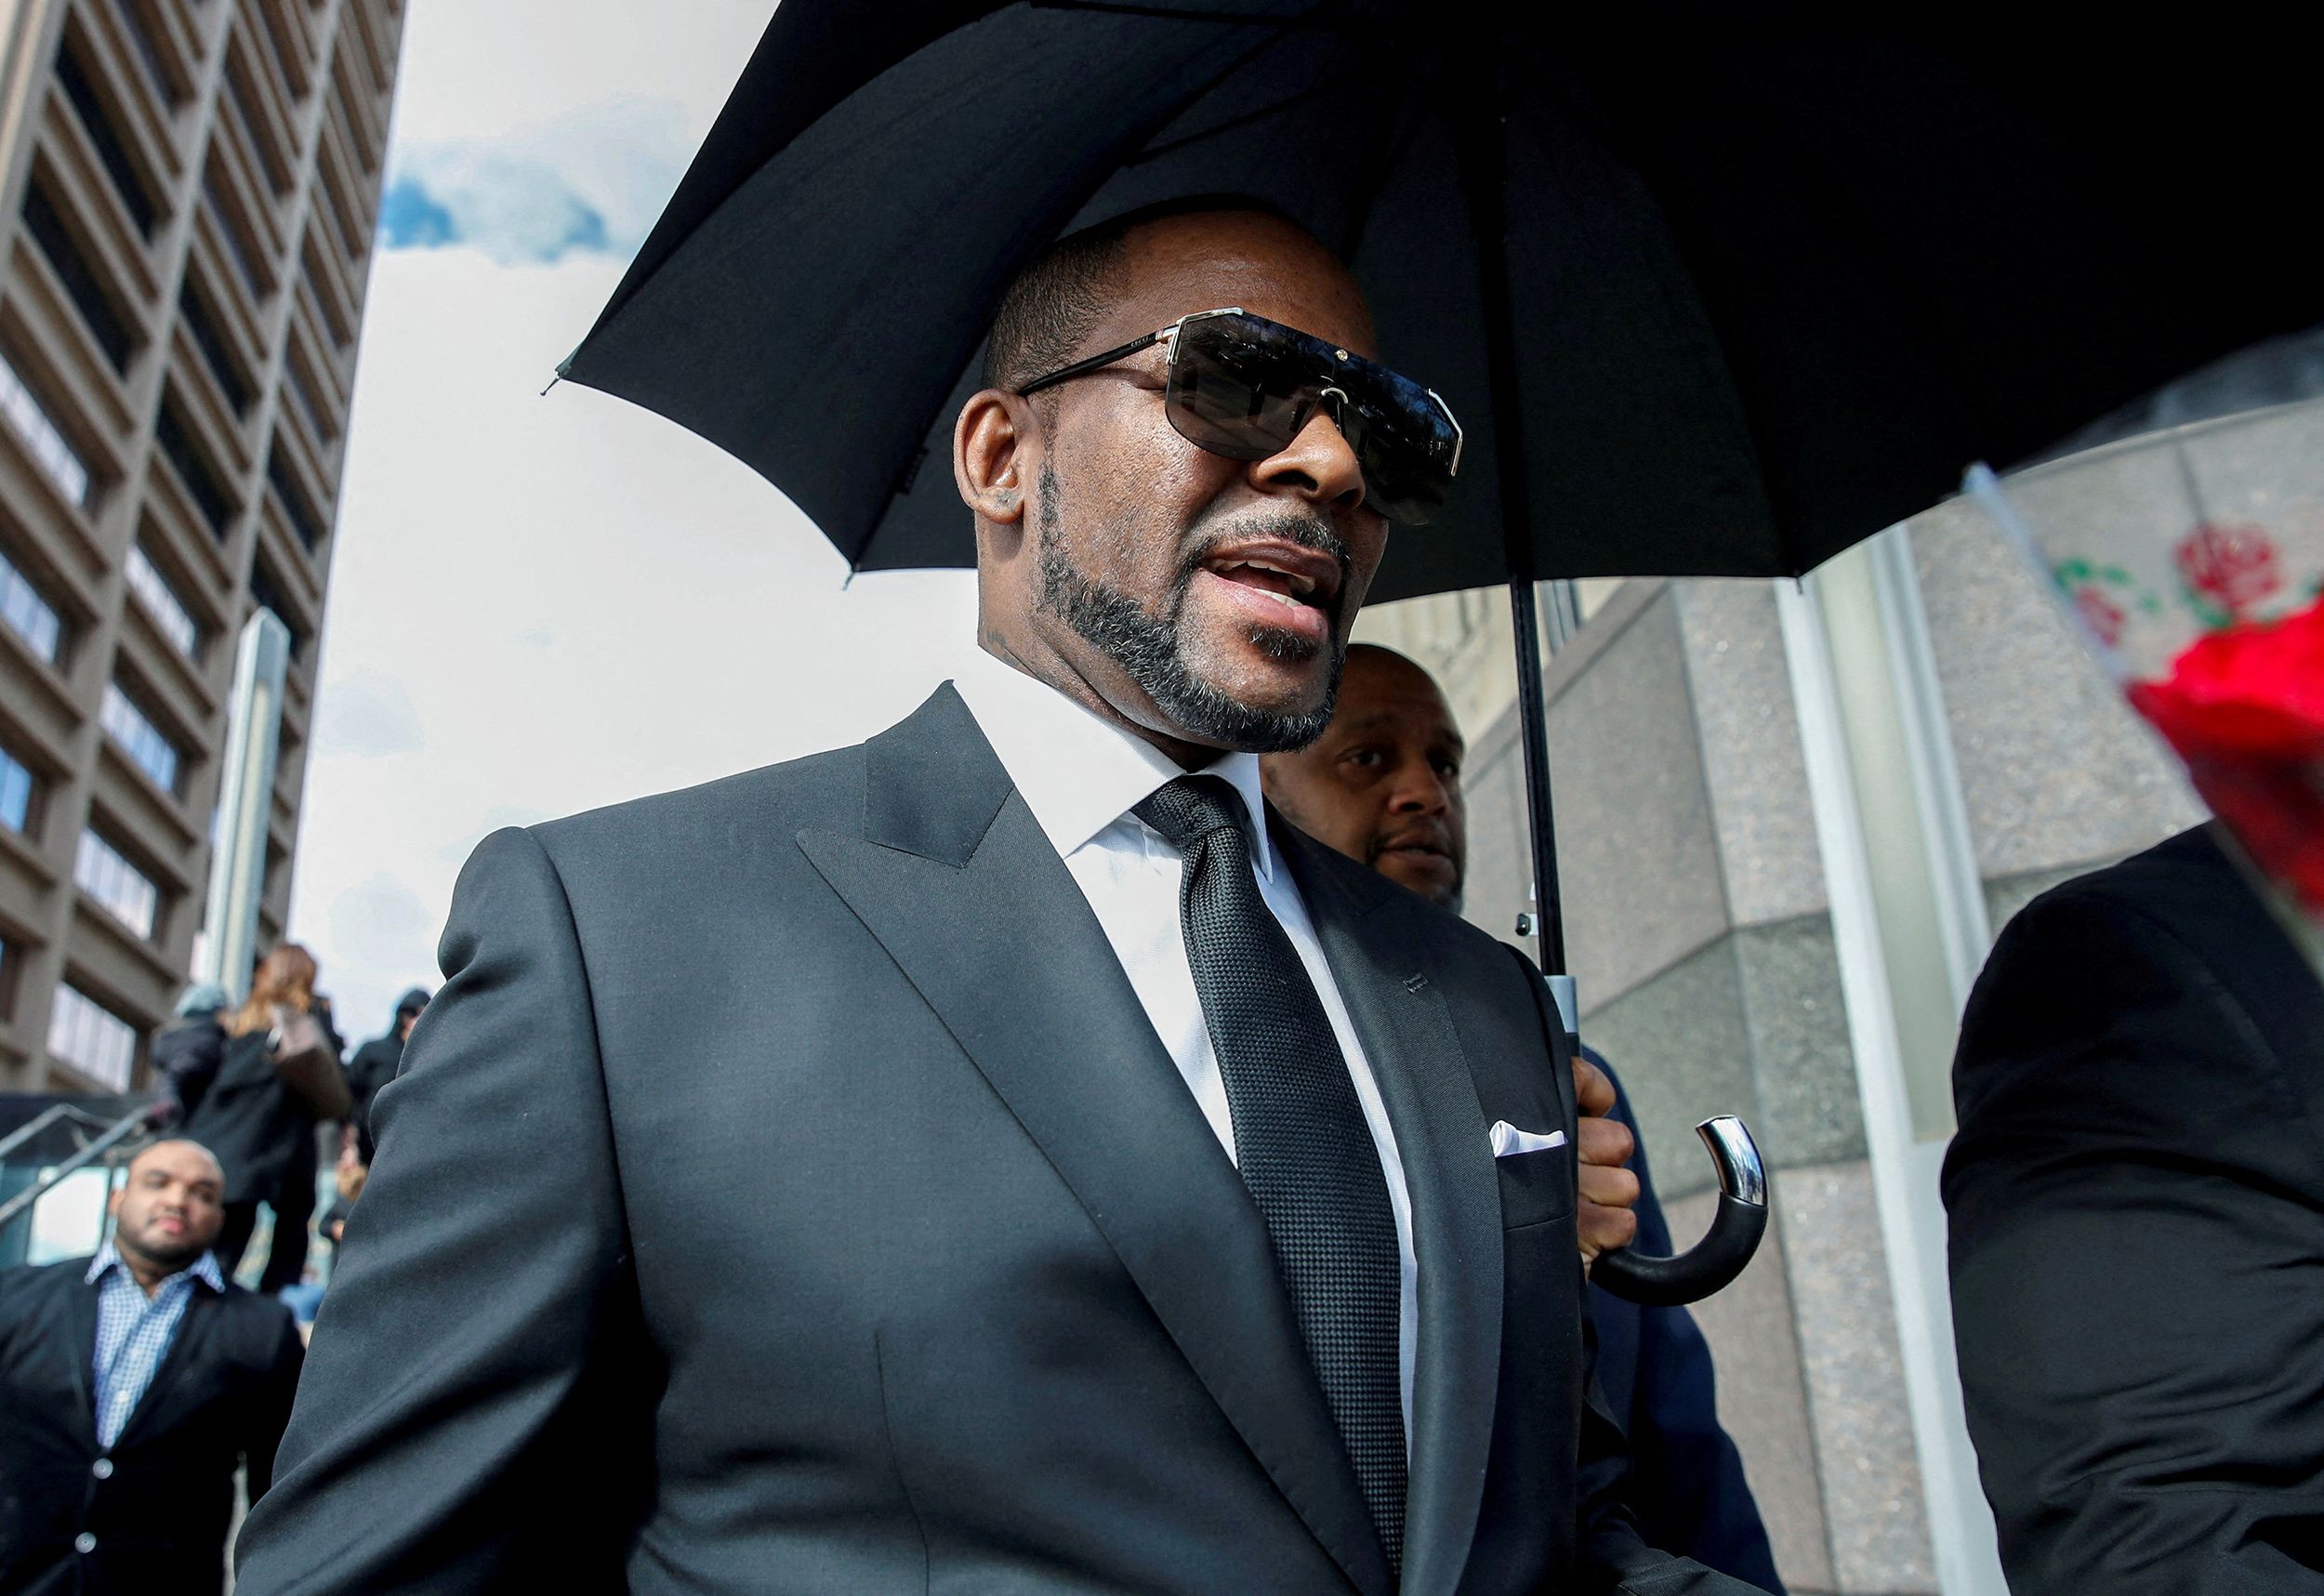 R. Kelly convicted of multiple child pornography and enticement charges, acquitted on others